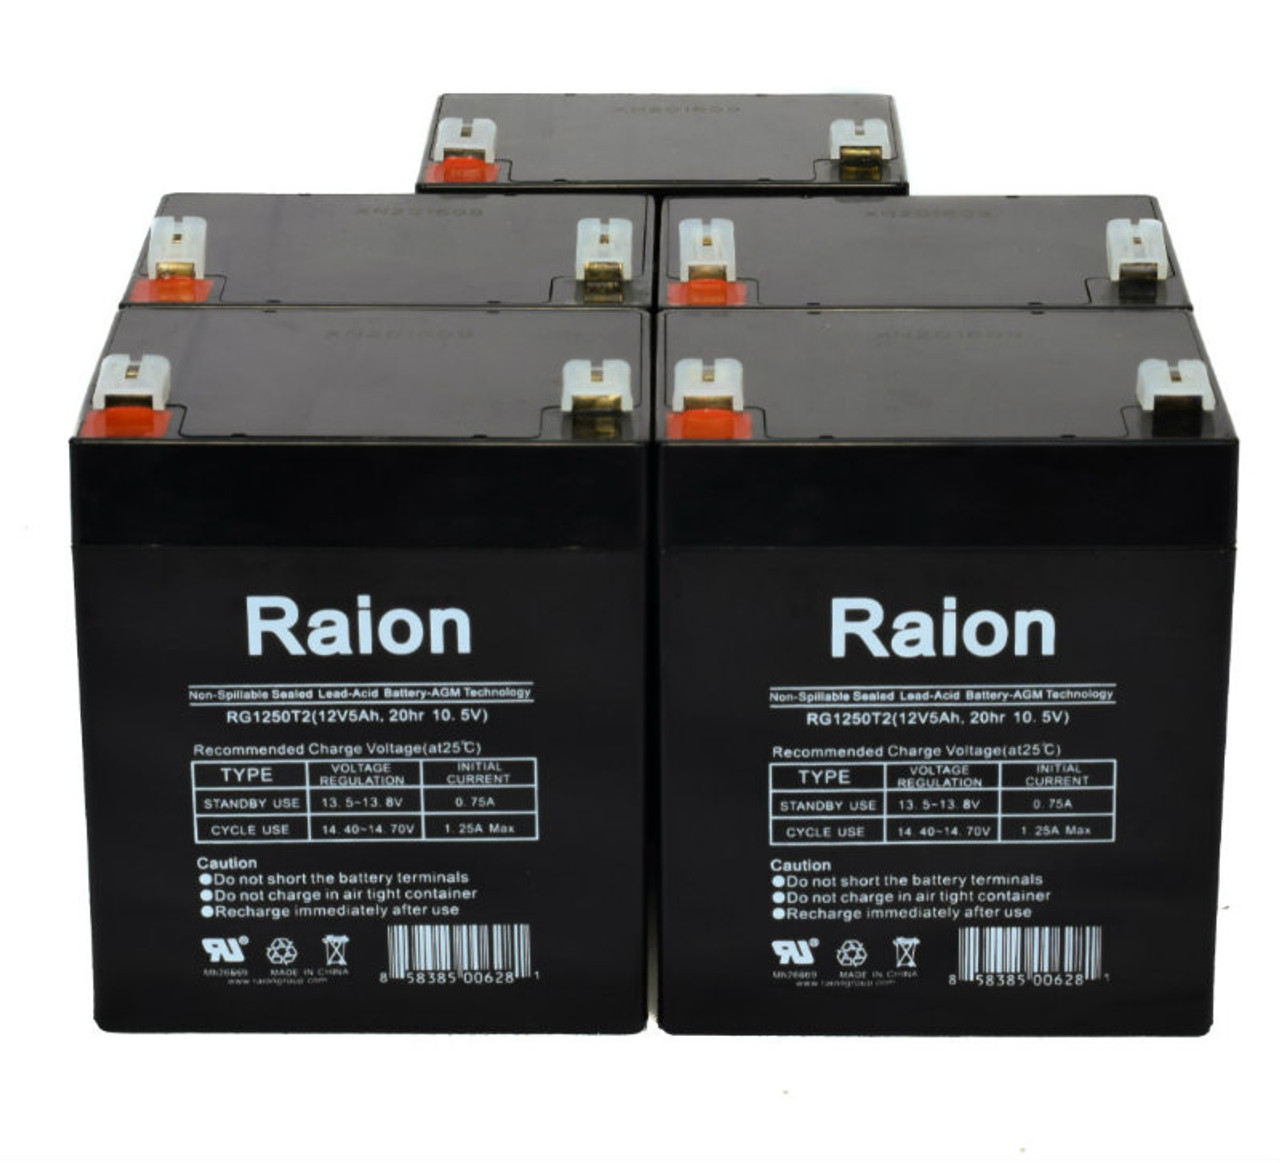 Raion Power RG1250T1 12V 5Ah Medical Battery for Orthopedic Systems 5892 Surgical Table-Top - 5 Pack